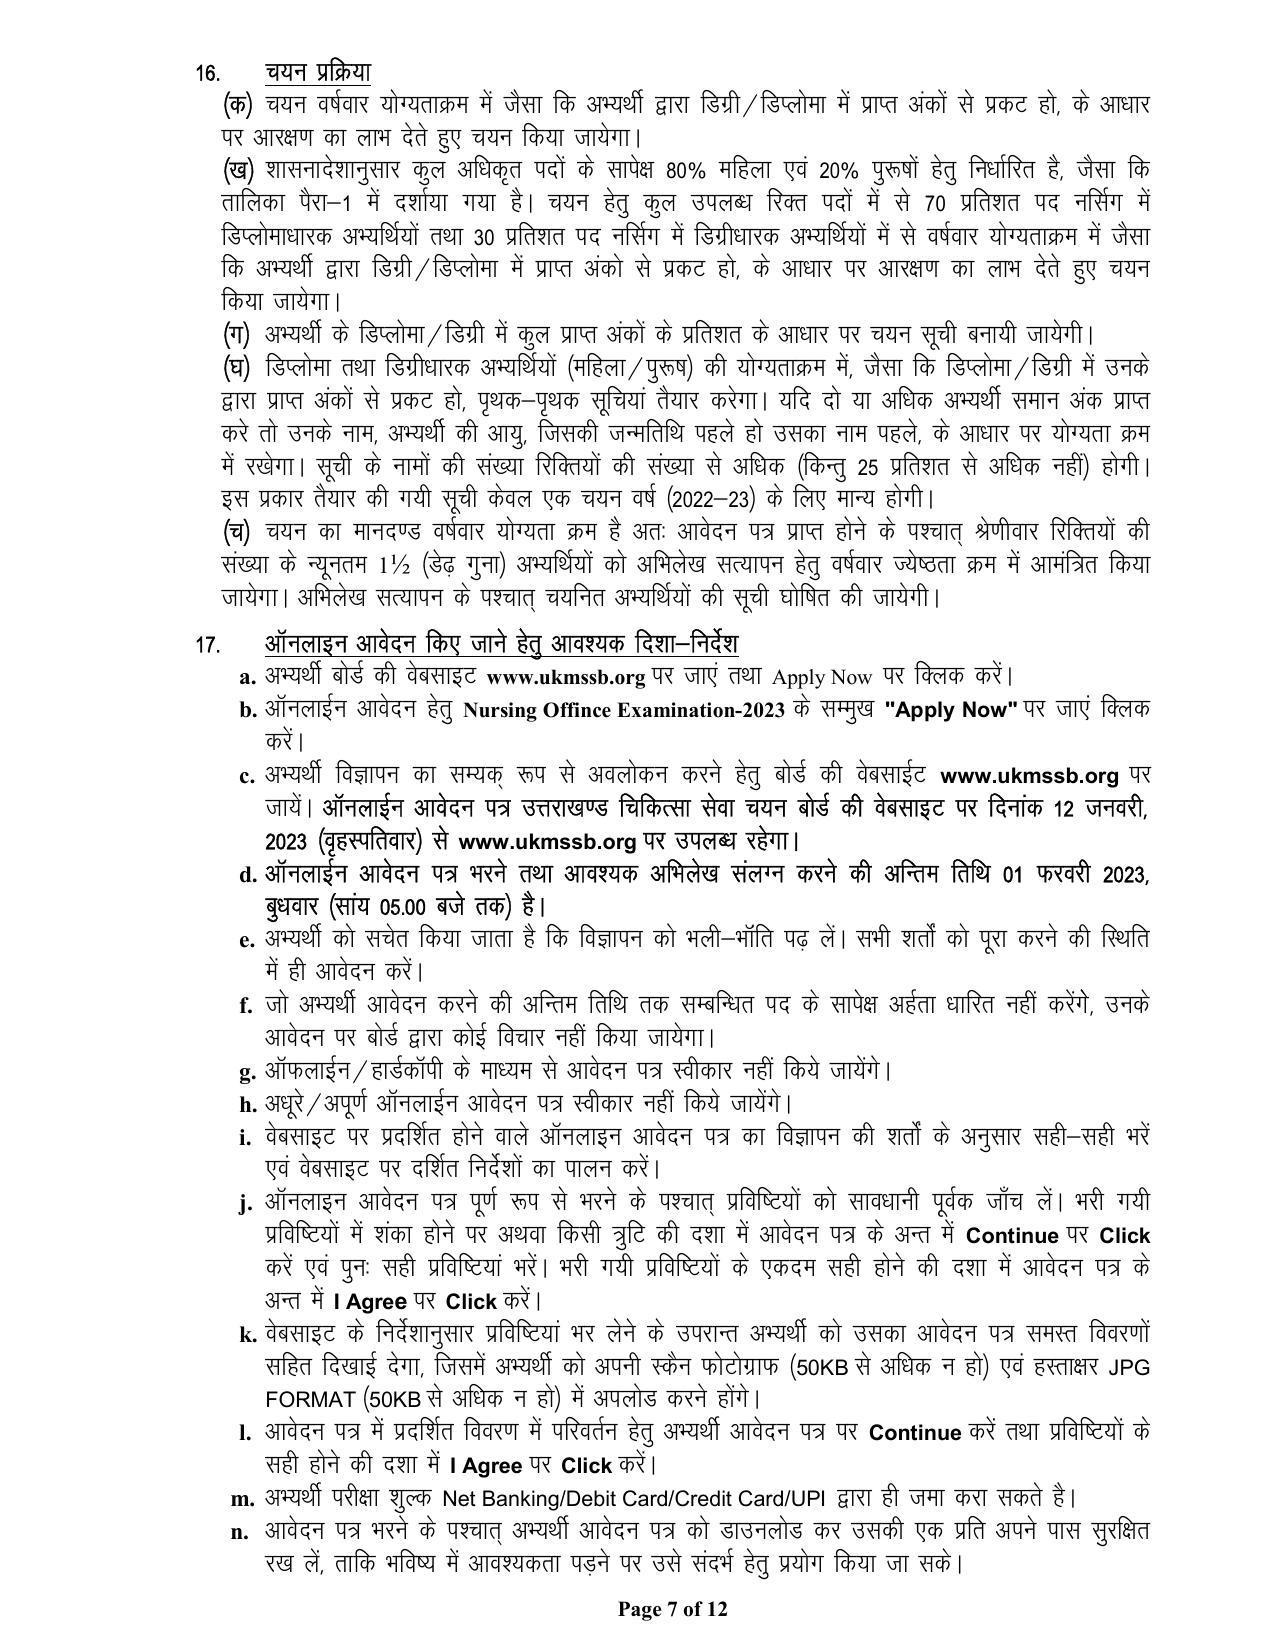 Uttrakhand Medical Service Selection Board (UKMSSB) Invites Application for 1564 Nursing Officer Recruitment 2023 - Page 10